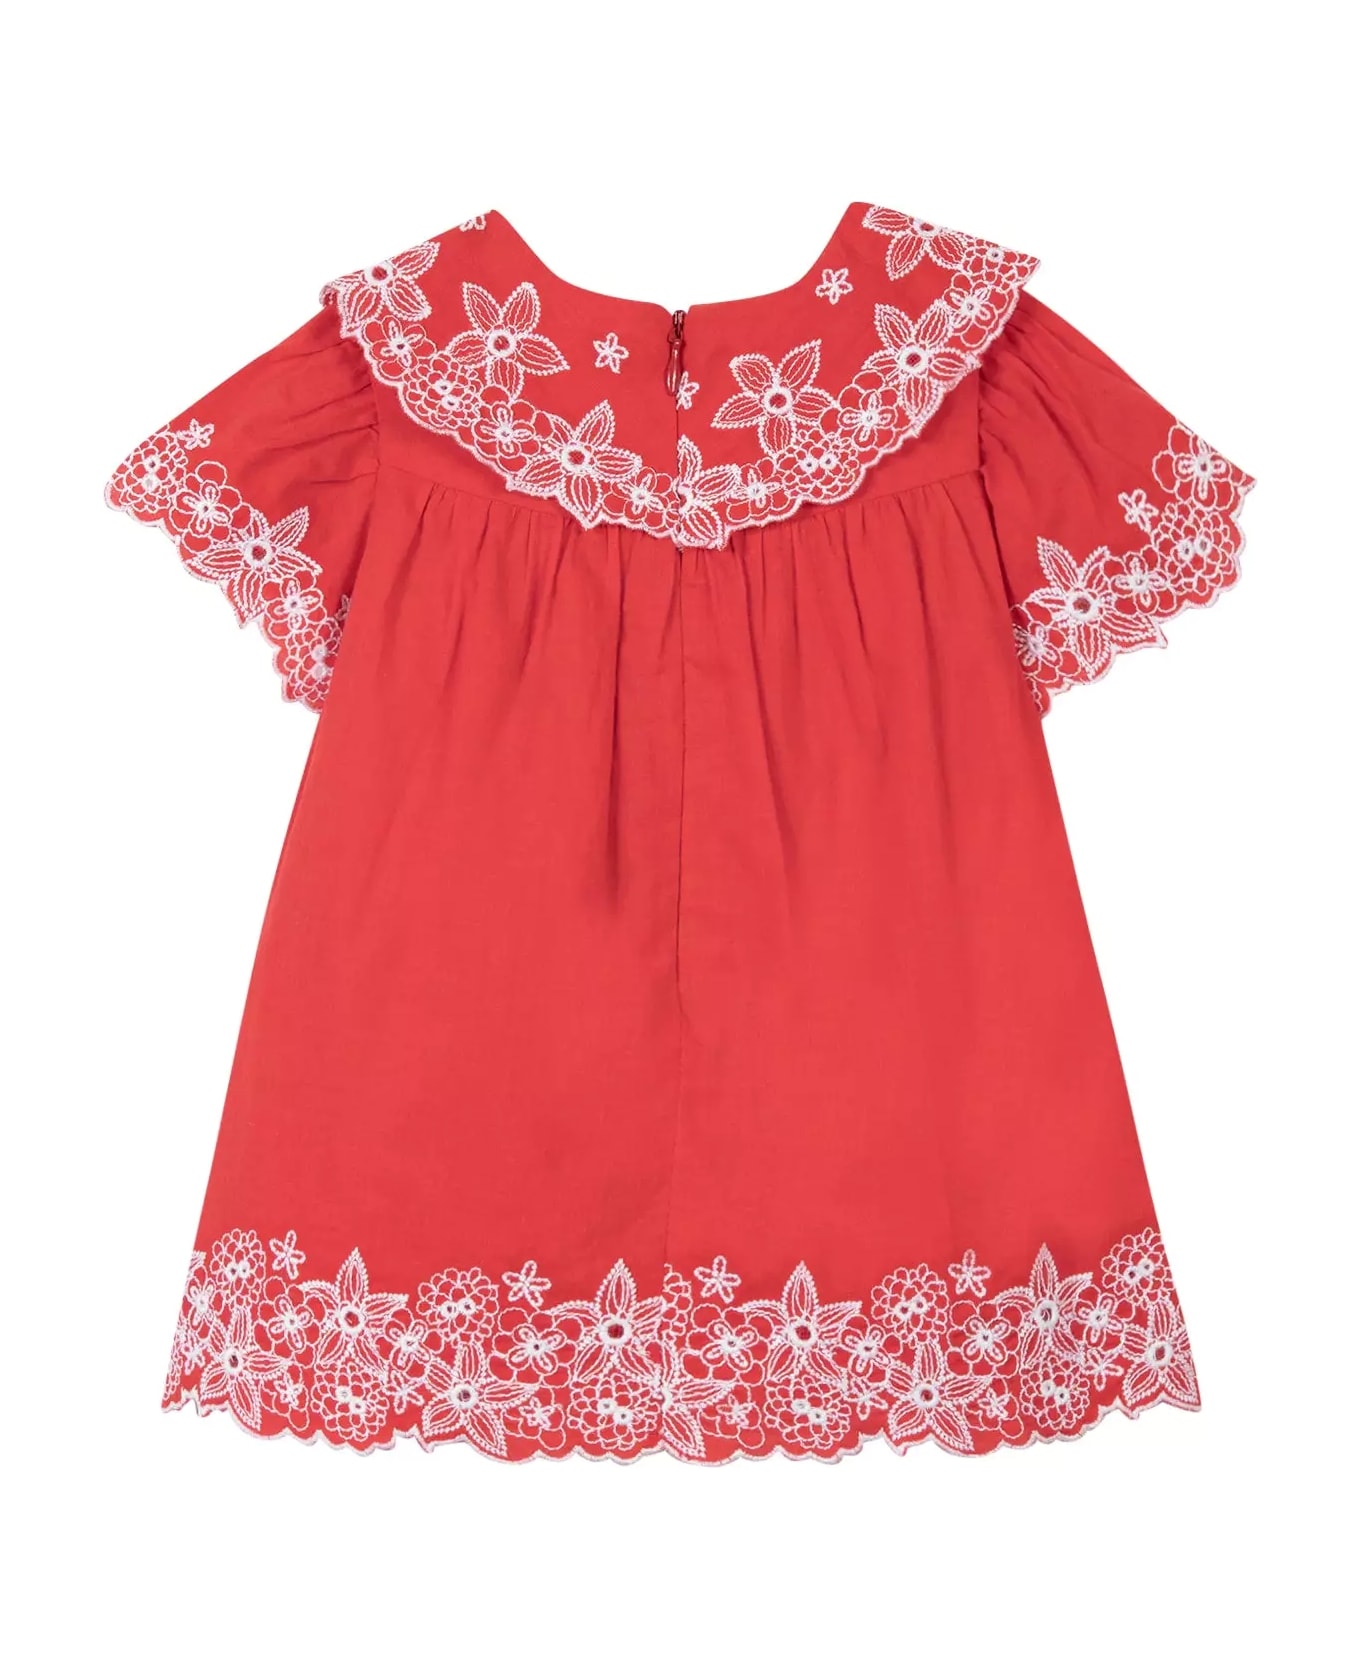 Tartine et Chocolat Dress With Embroidery - Red